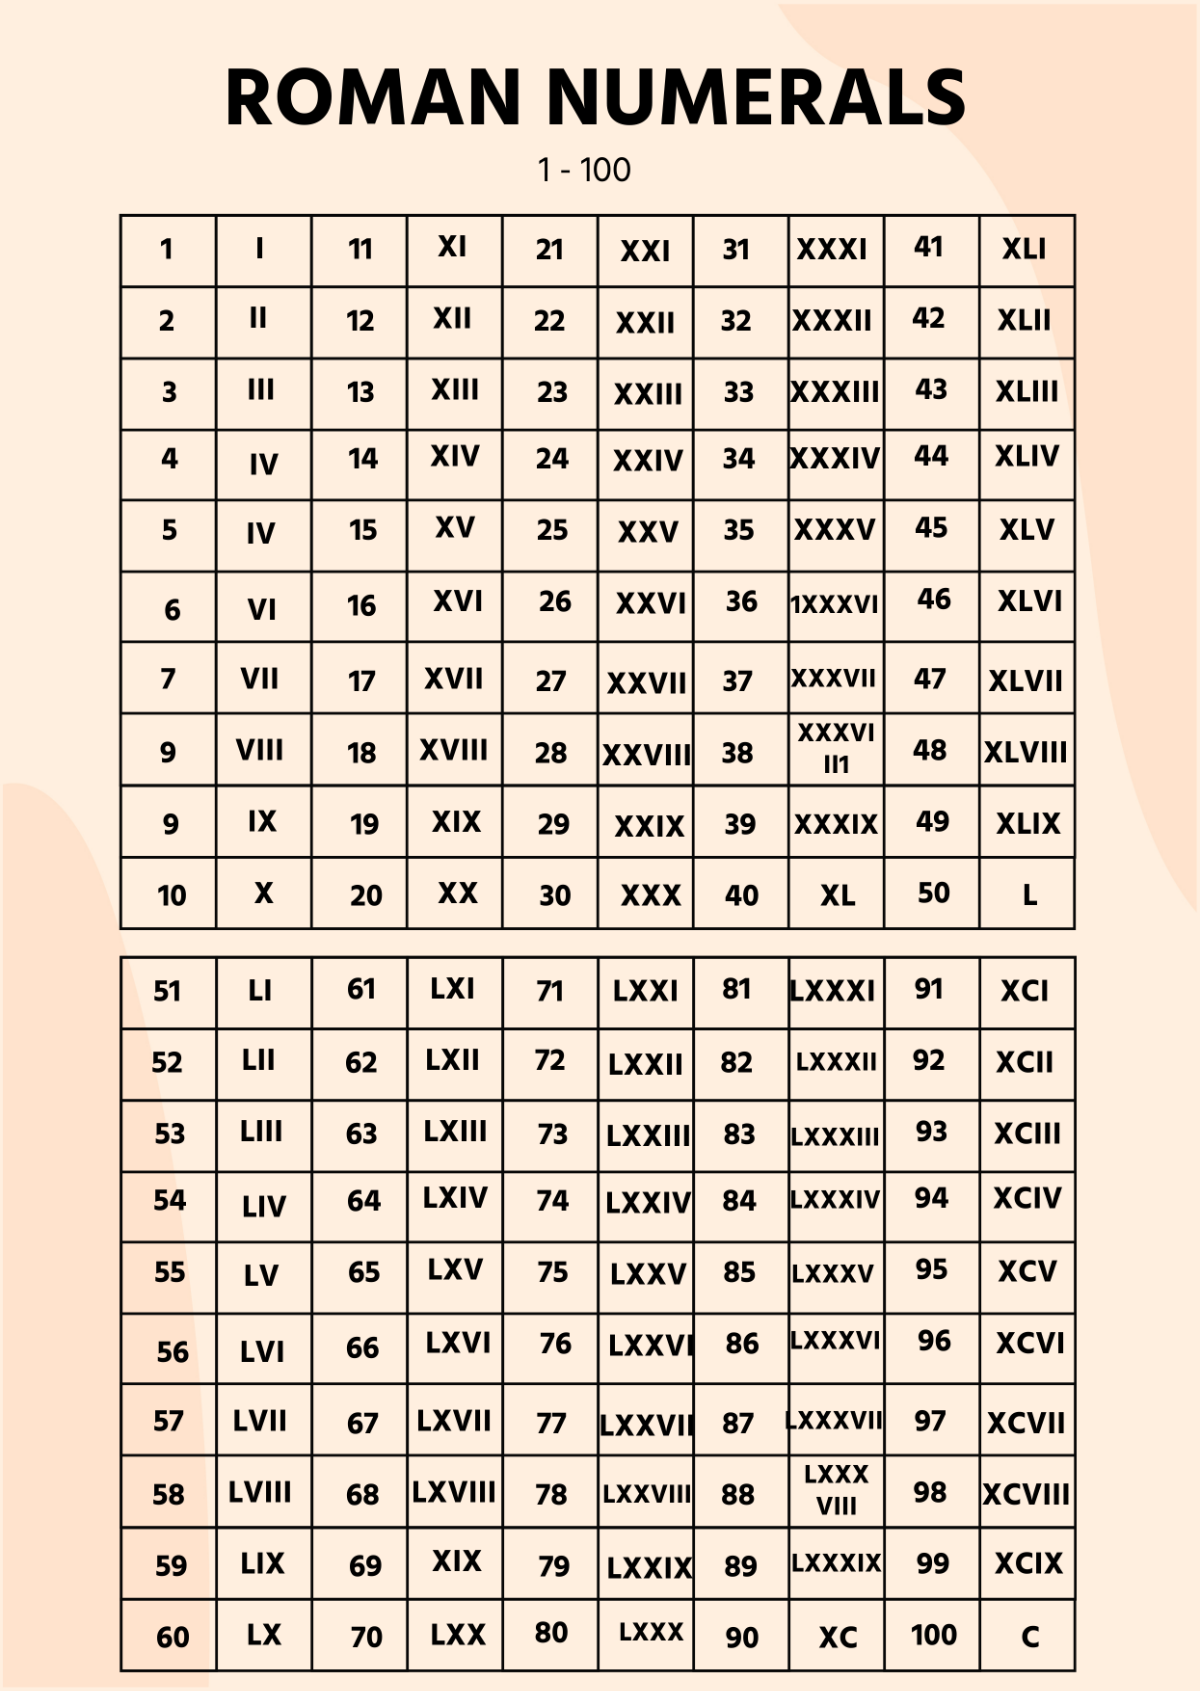 Roman Numerals 1 to 100 Chart